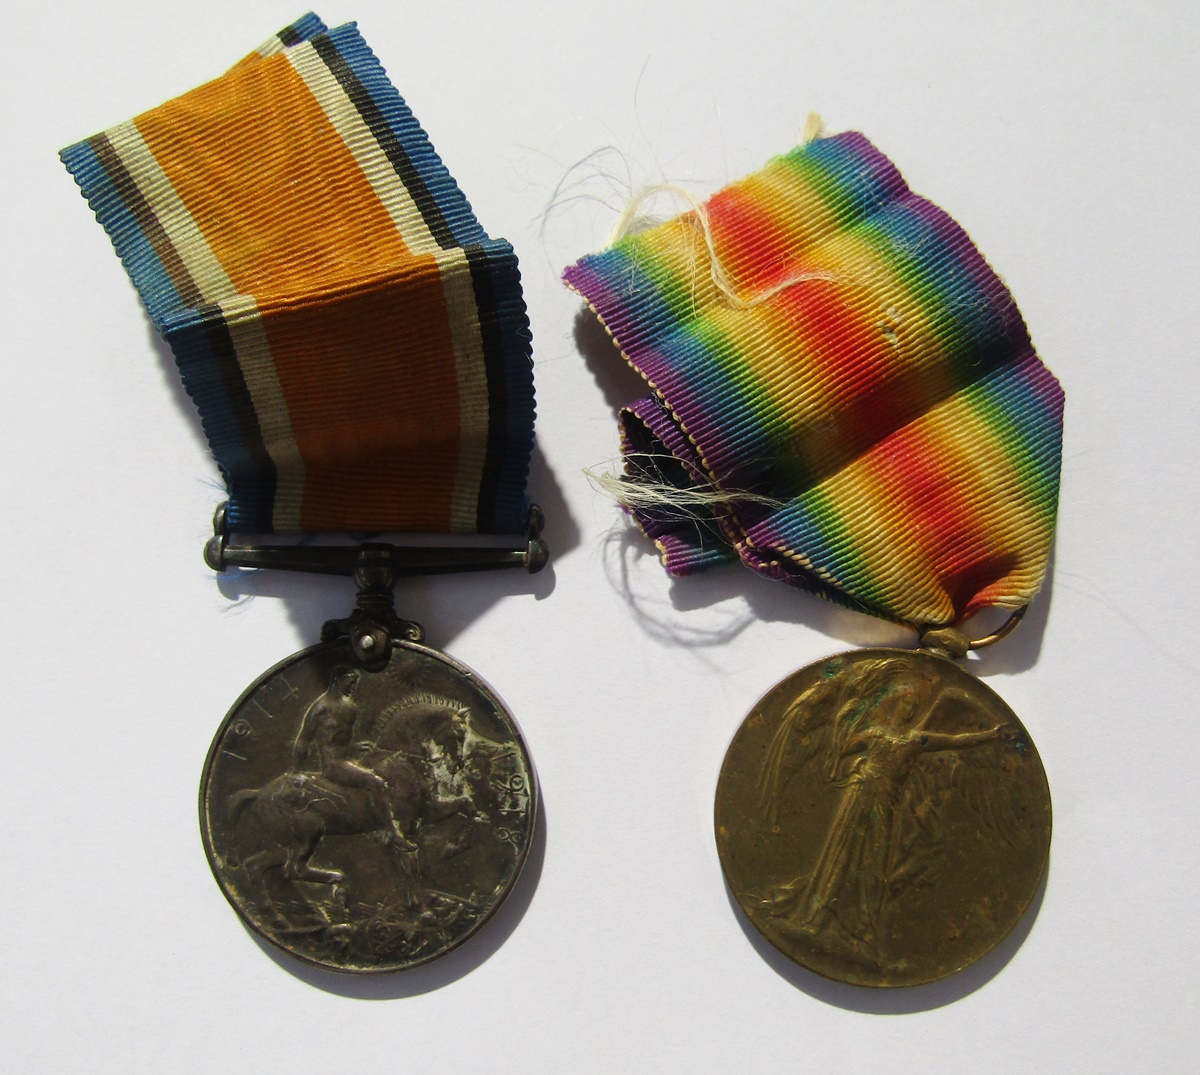 WWI medals named to "Eng.Commr.W.H.Fox.R.N.R.", "William.H.Fox" on mercantile marine medal, together - Image 3 of 9